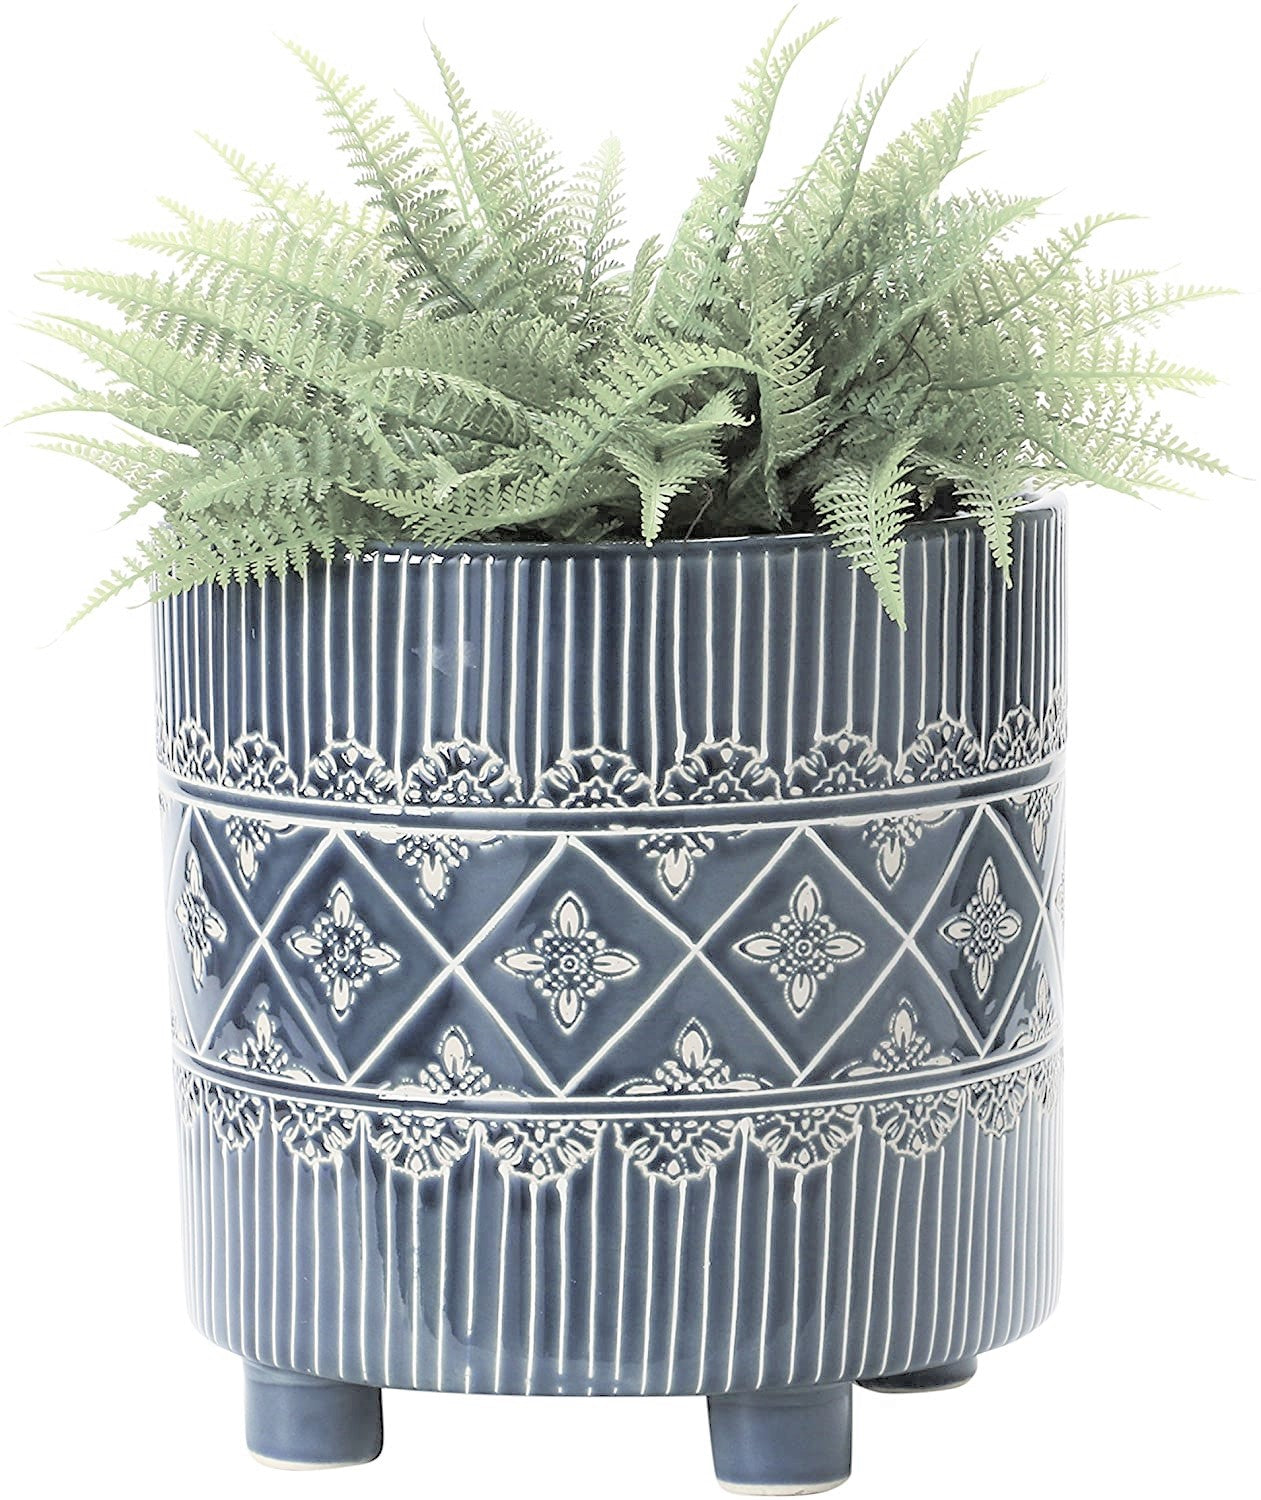 Debossed Stoneware Footed Planter - Blue & White - 10-1/2-in (Holds 9" Pot) - Mellow Monkey